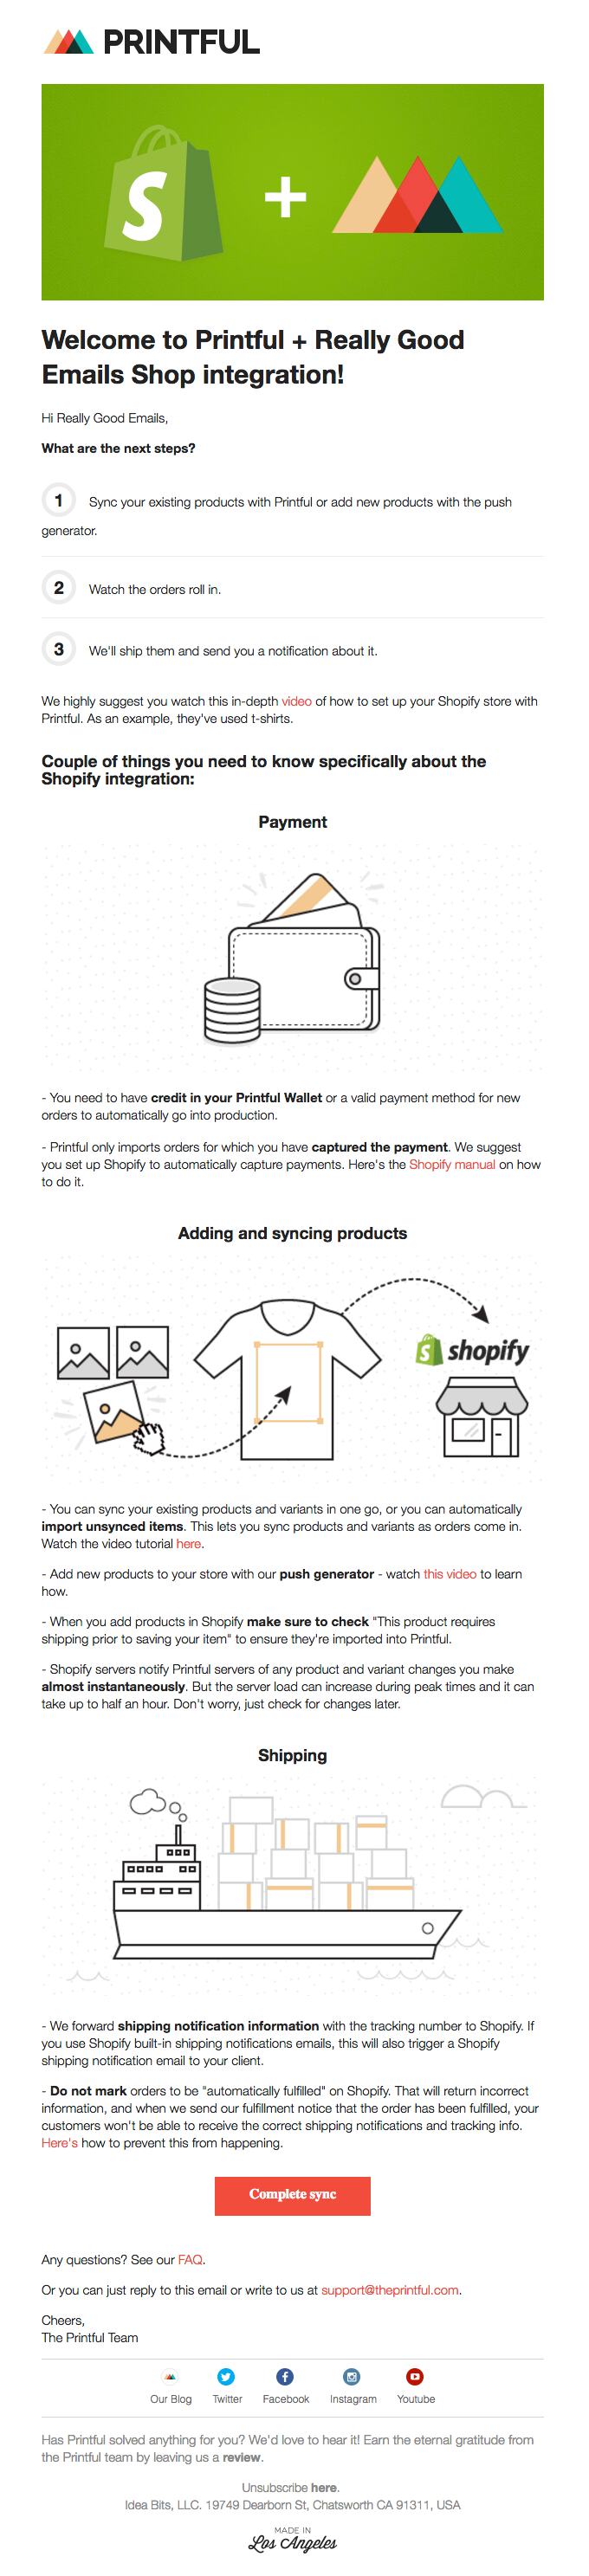 Welcome to Printful + Really Good Emails Shop integration!